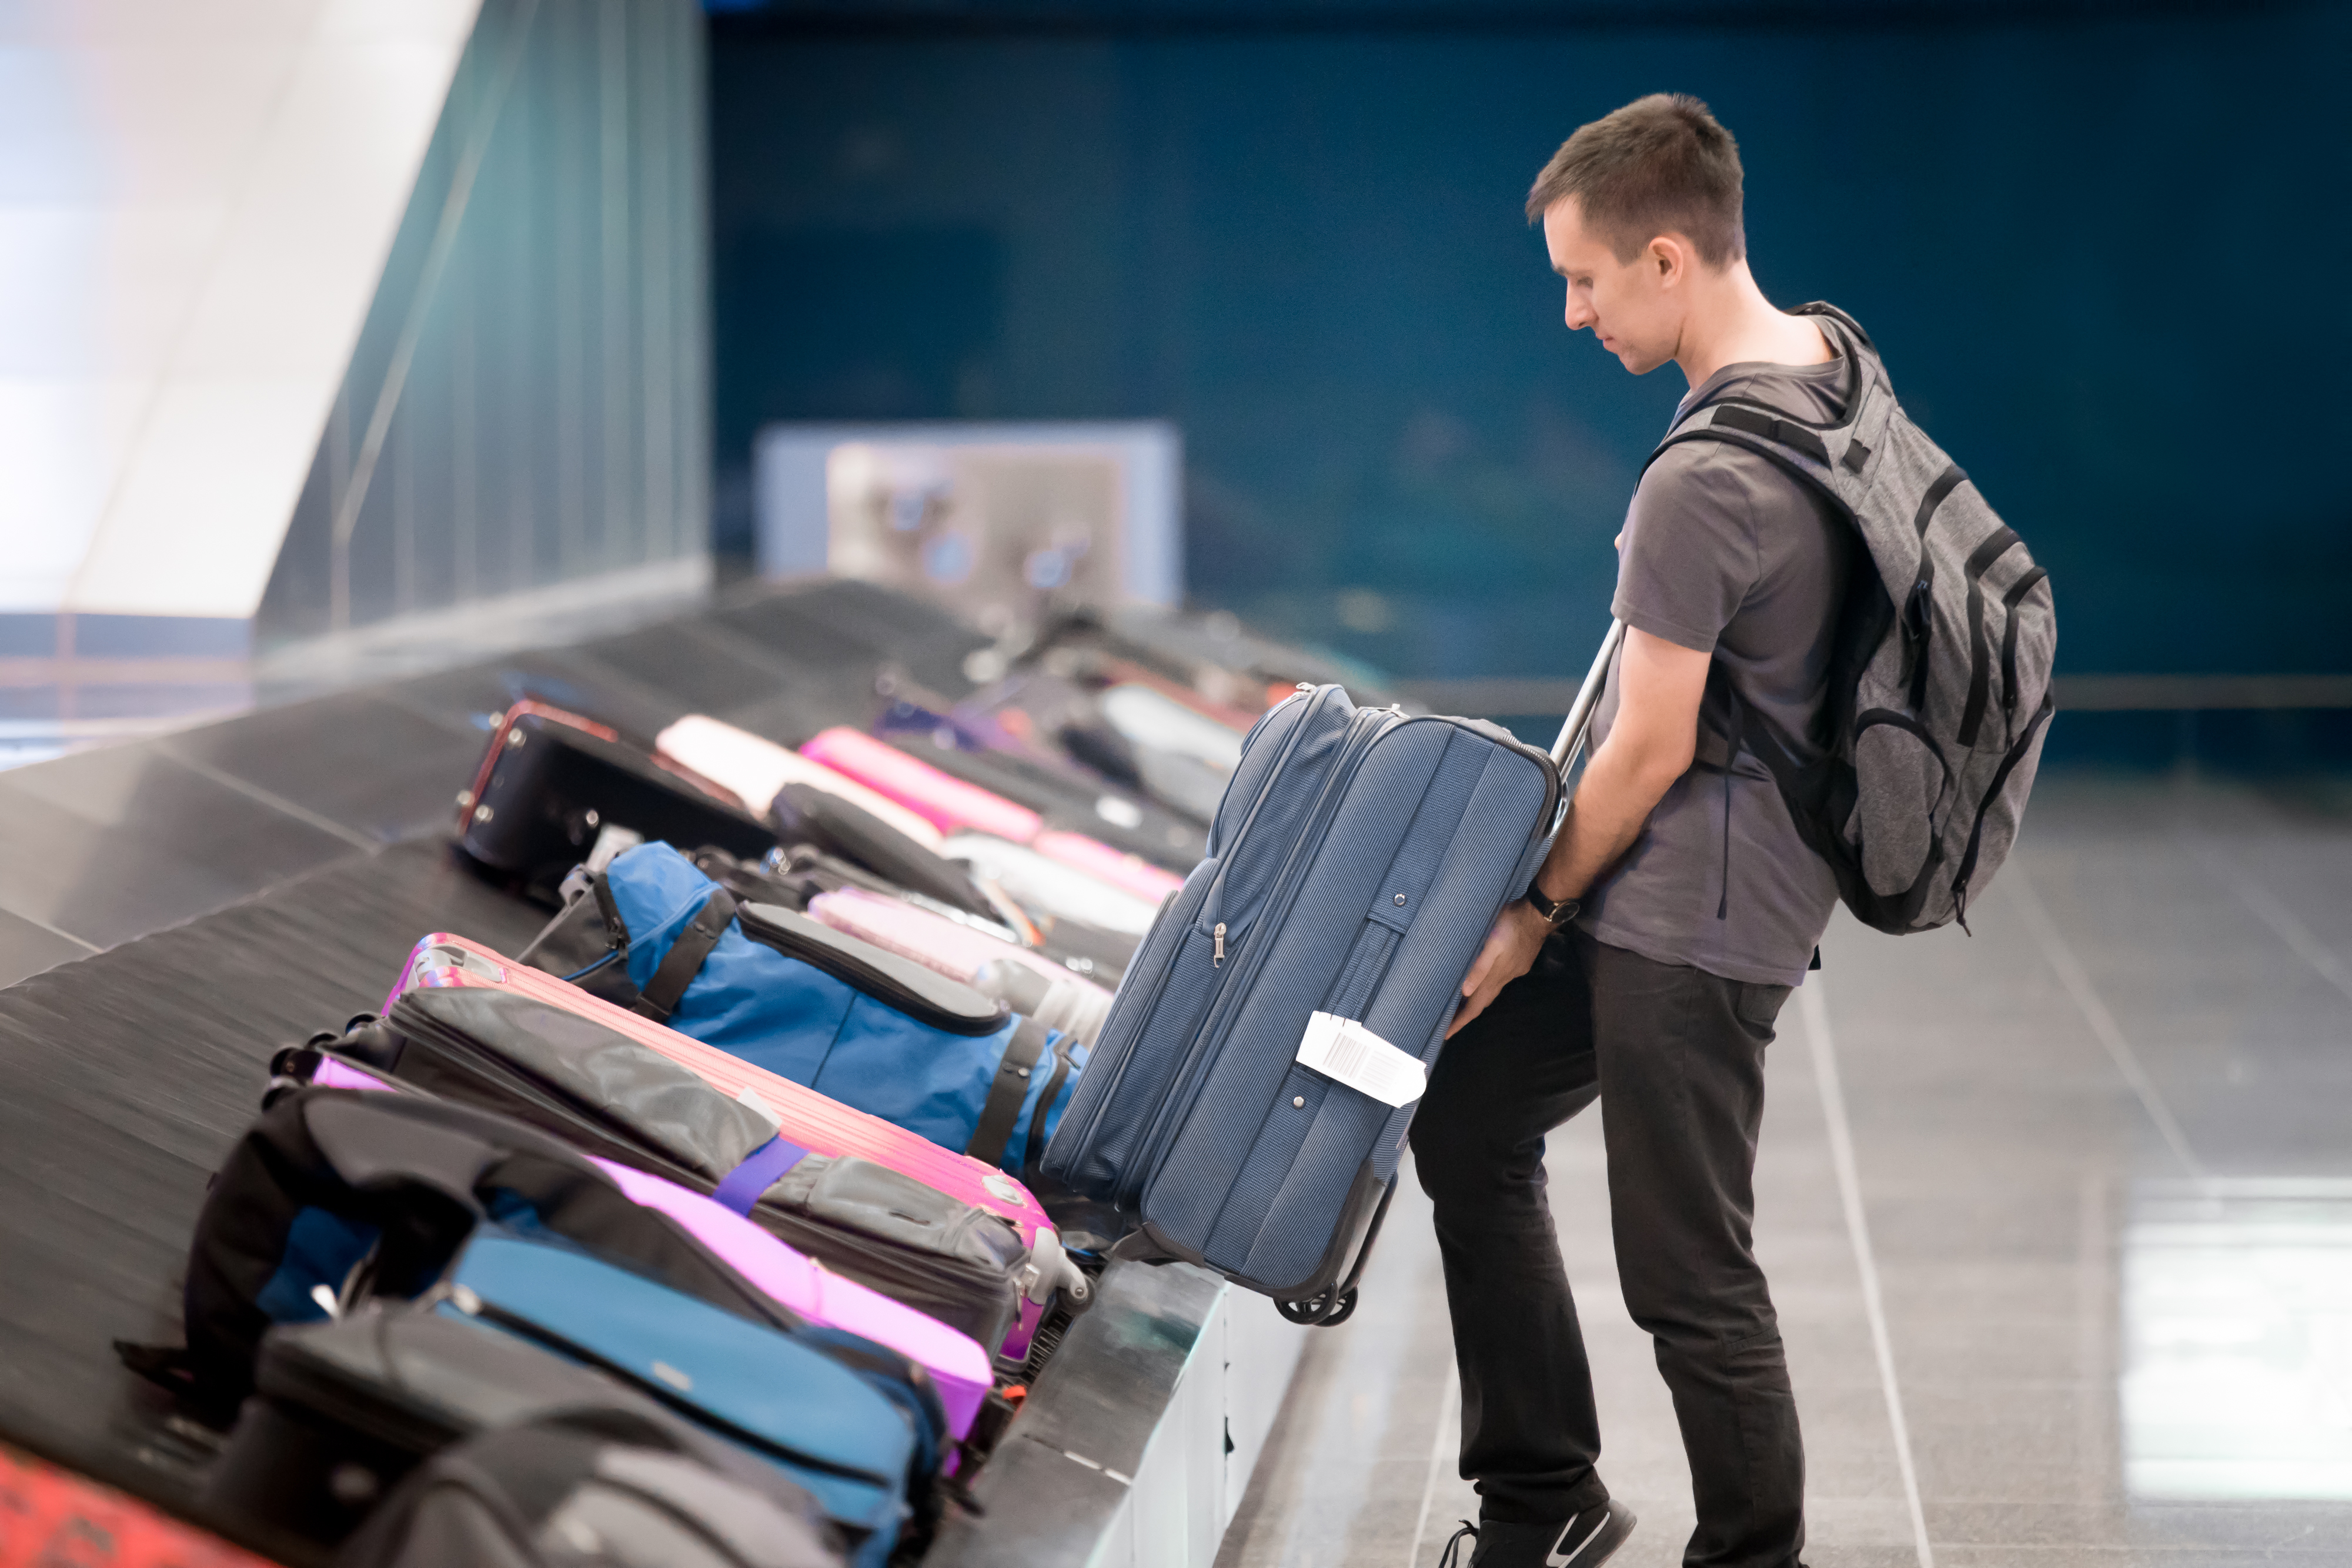 Bags of innovation inside automated baggage handling systems